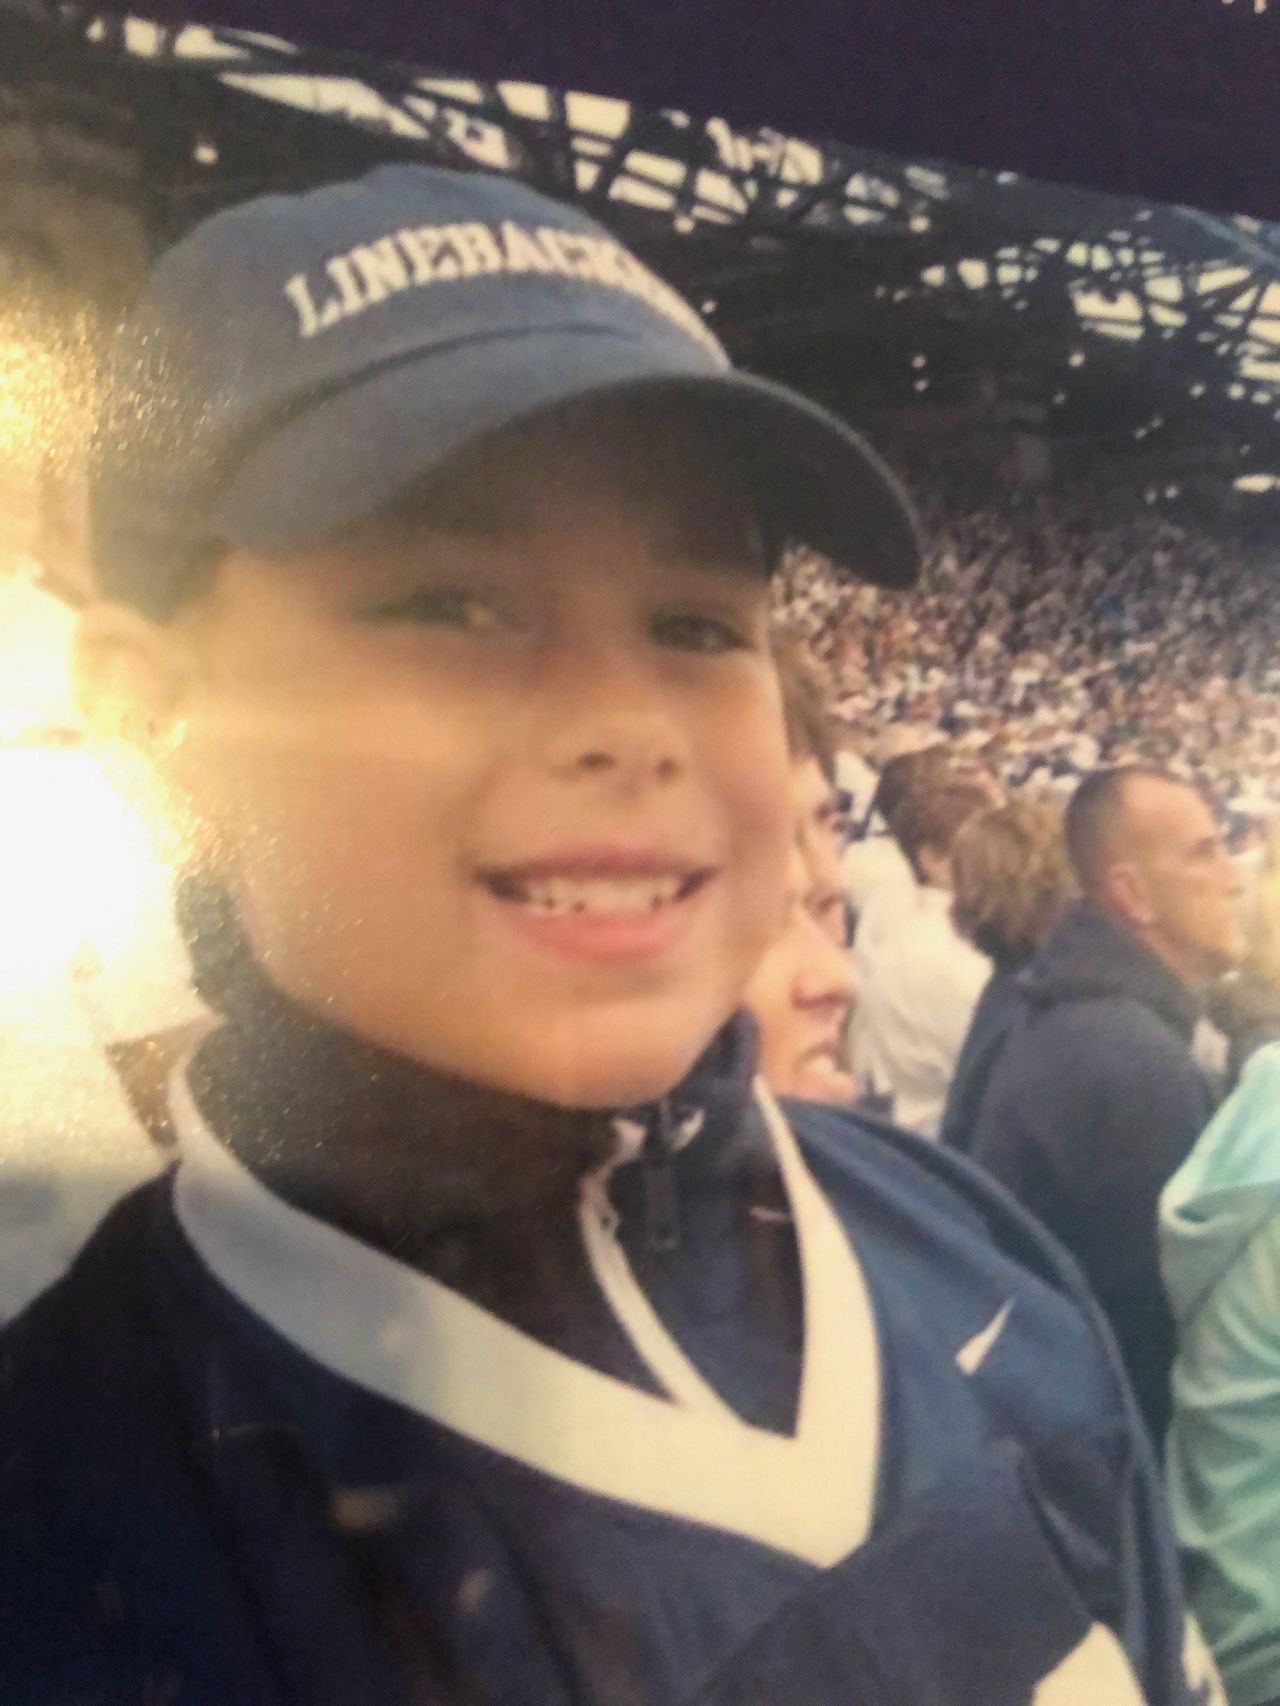 Jon at his first Penn State game in 2011